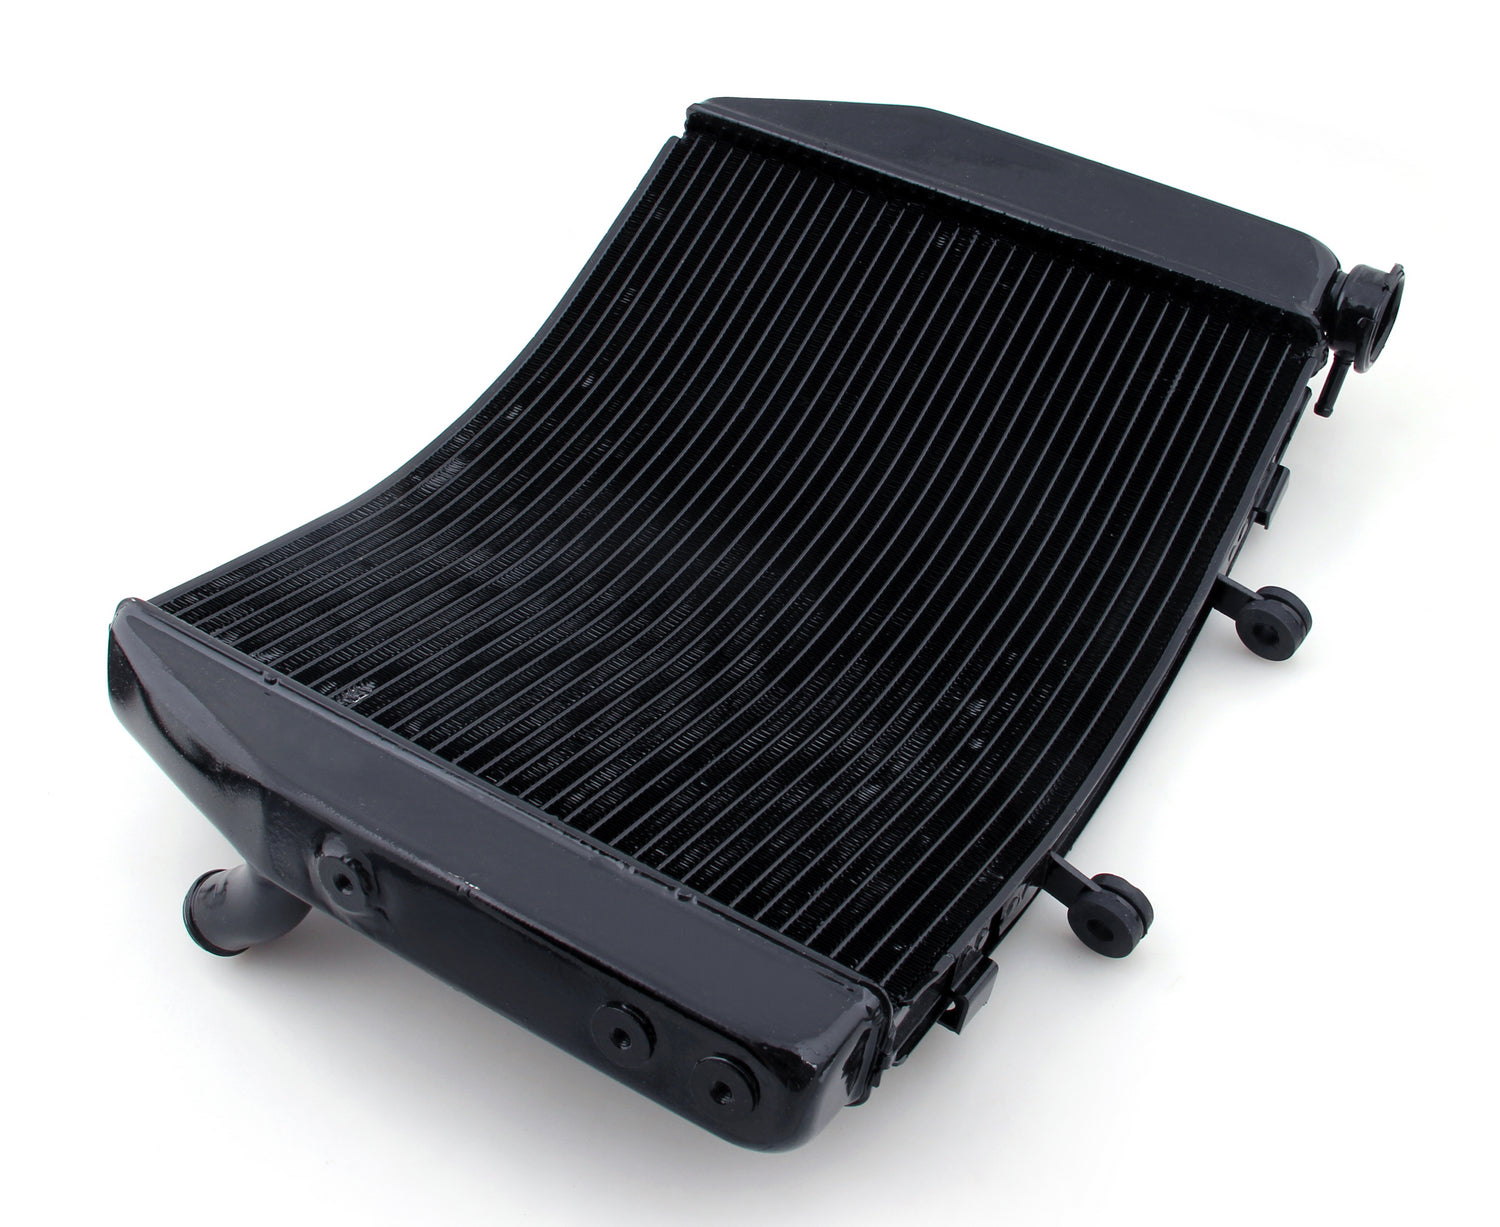 Radiator Grille Guard Cooler For Kawasaki ZX6R ZX 6R 2007-2008 Black